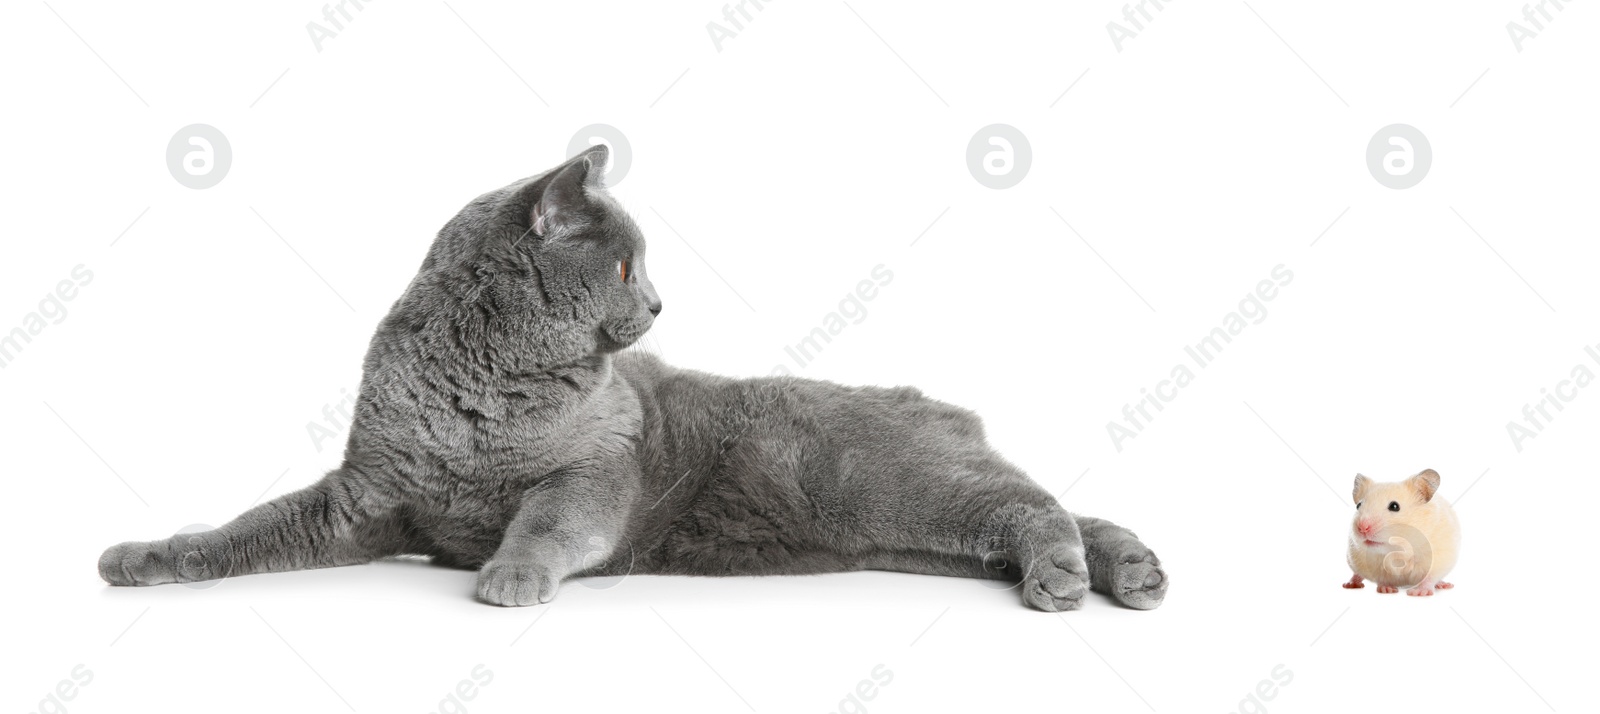 Image of Cute cat and hamster on white background